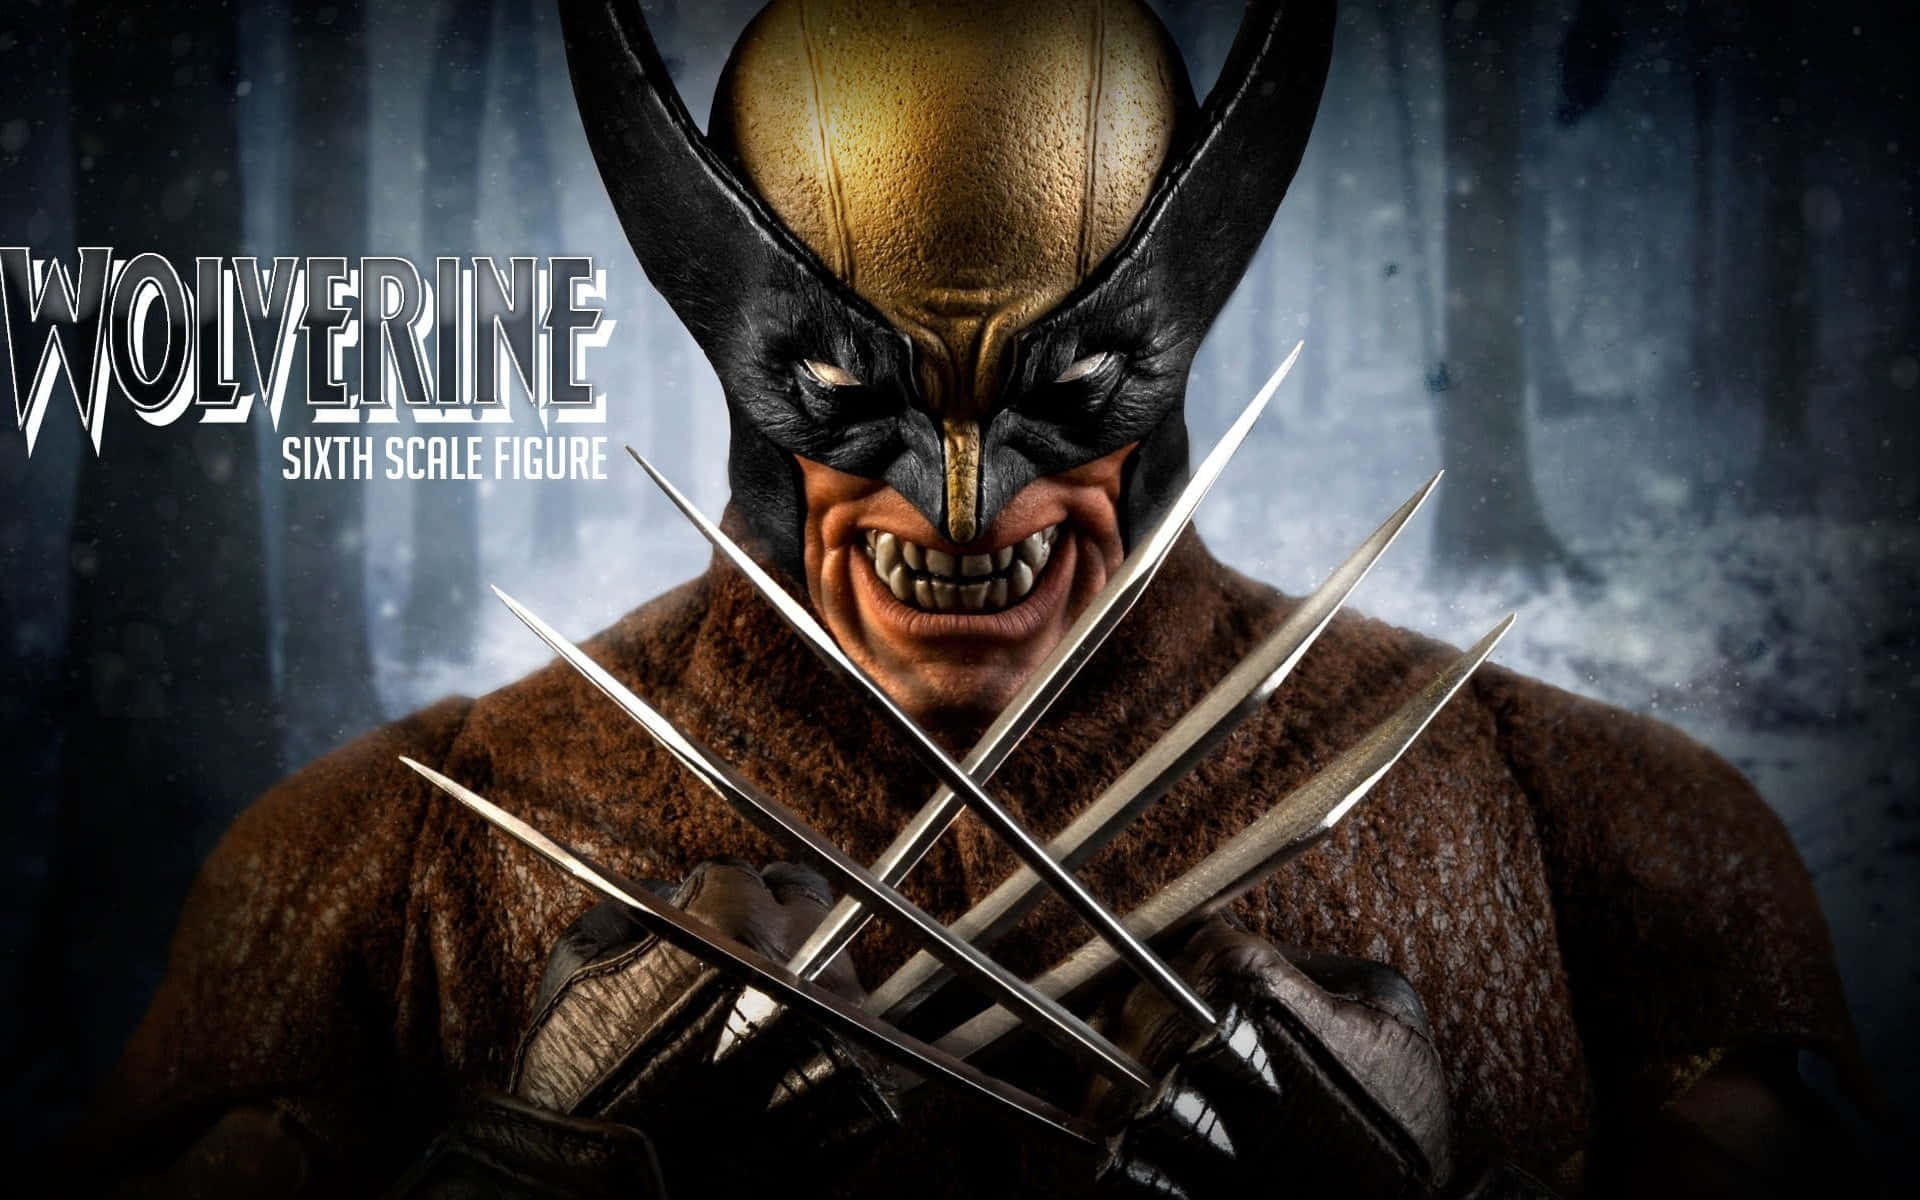 Wolverine fights with everything he has to avenge his wrongs